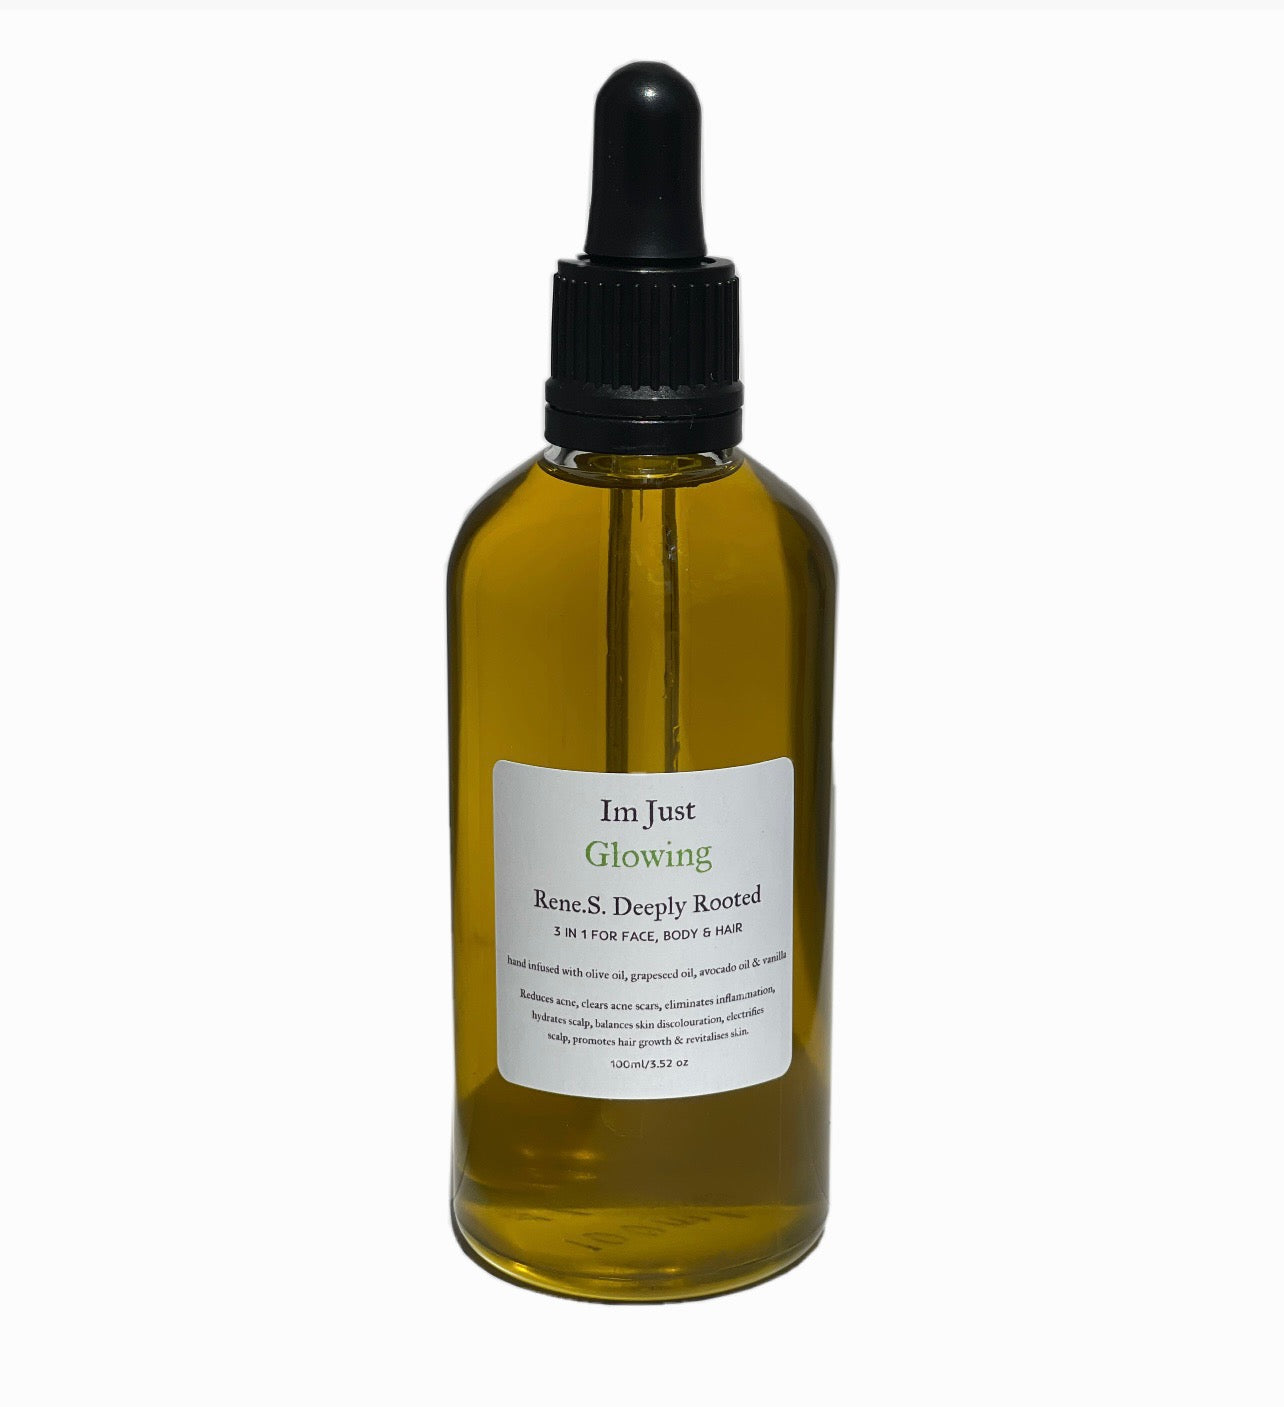 Rene.S. Deeply Rooted Oil 100ml/3.52 oz - Im Just Glowing